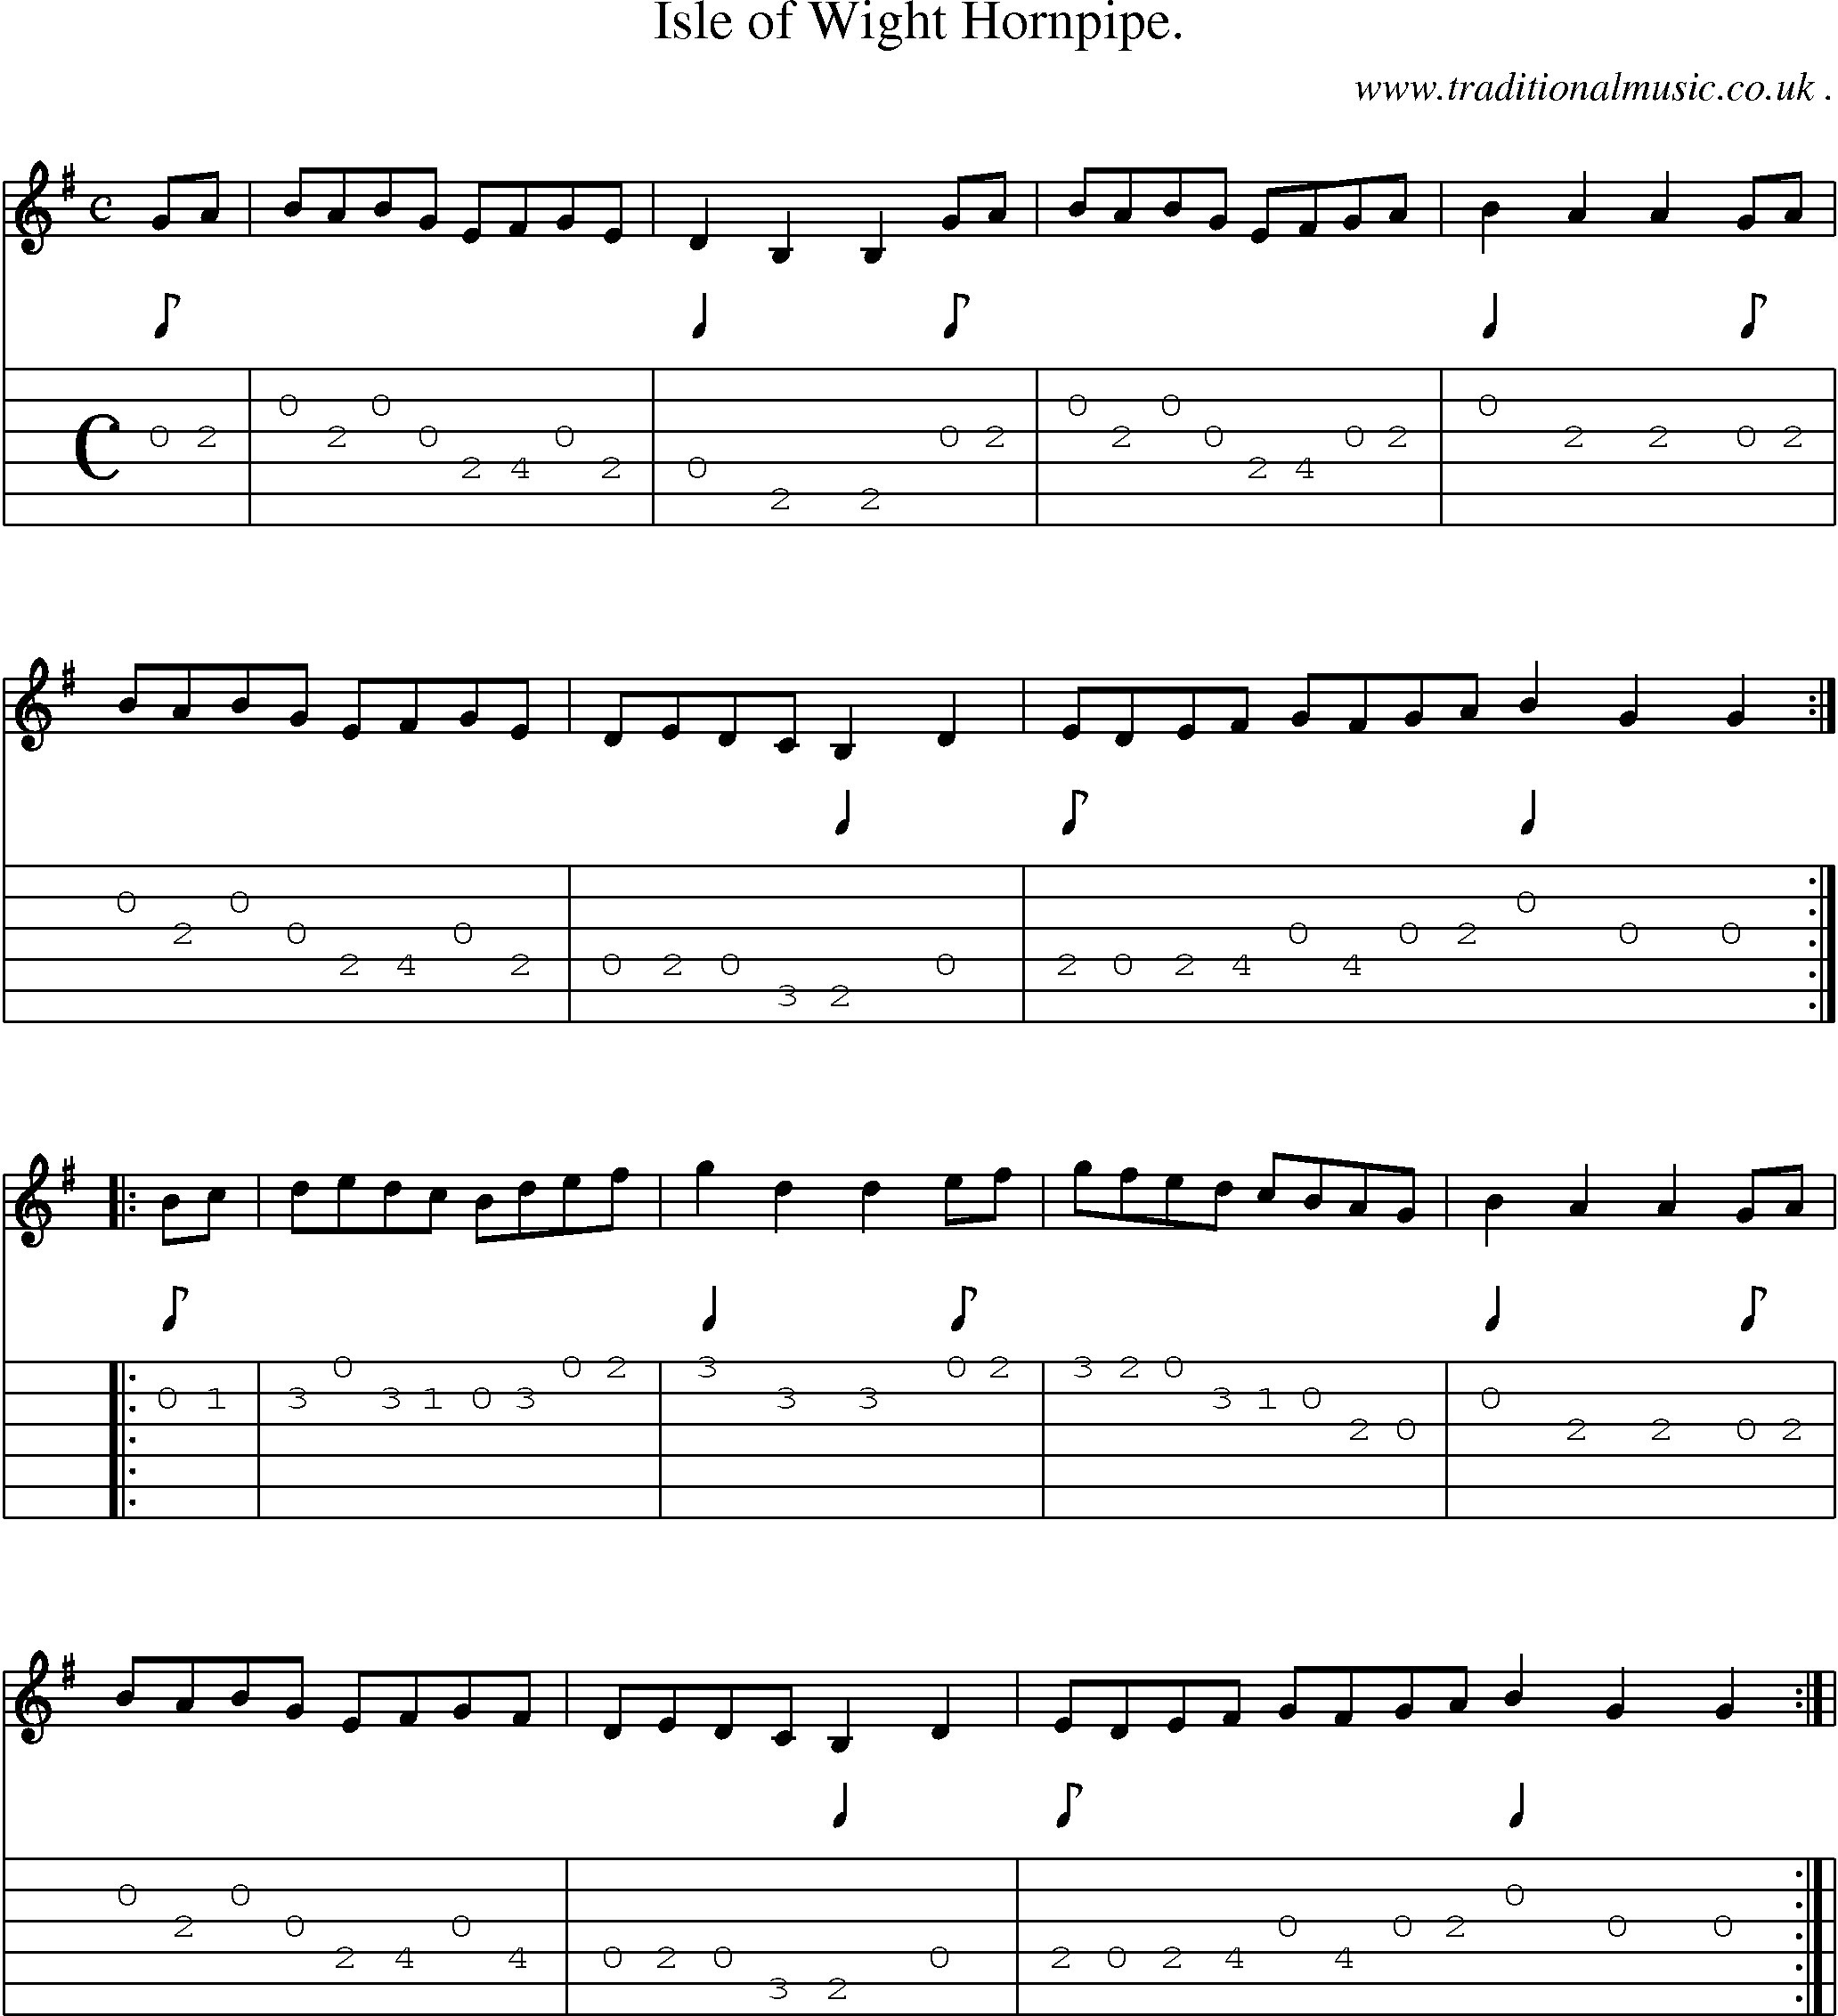 Sheet-Music and Guitar Tabs for Isle Of Wight Hornpipe